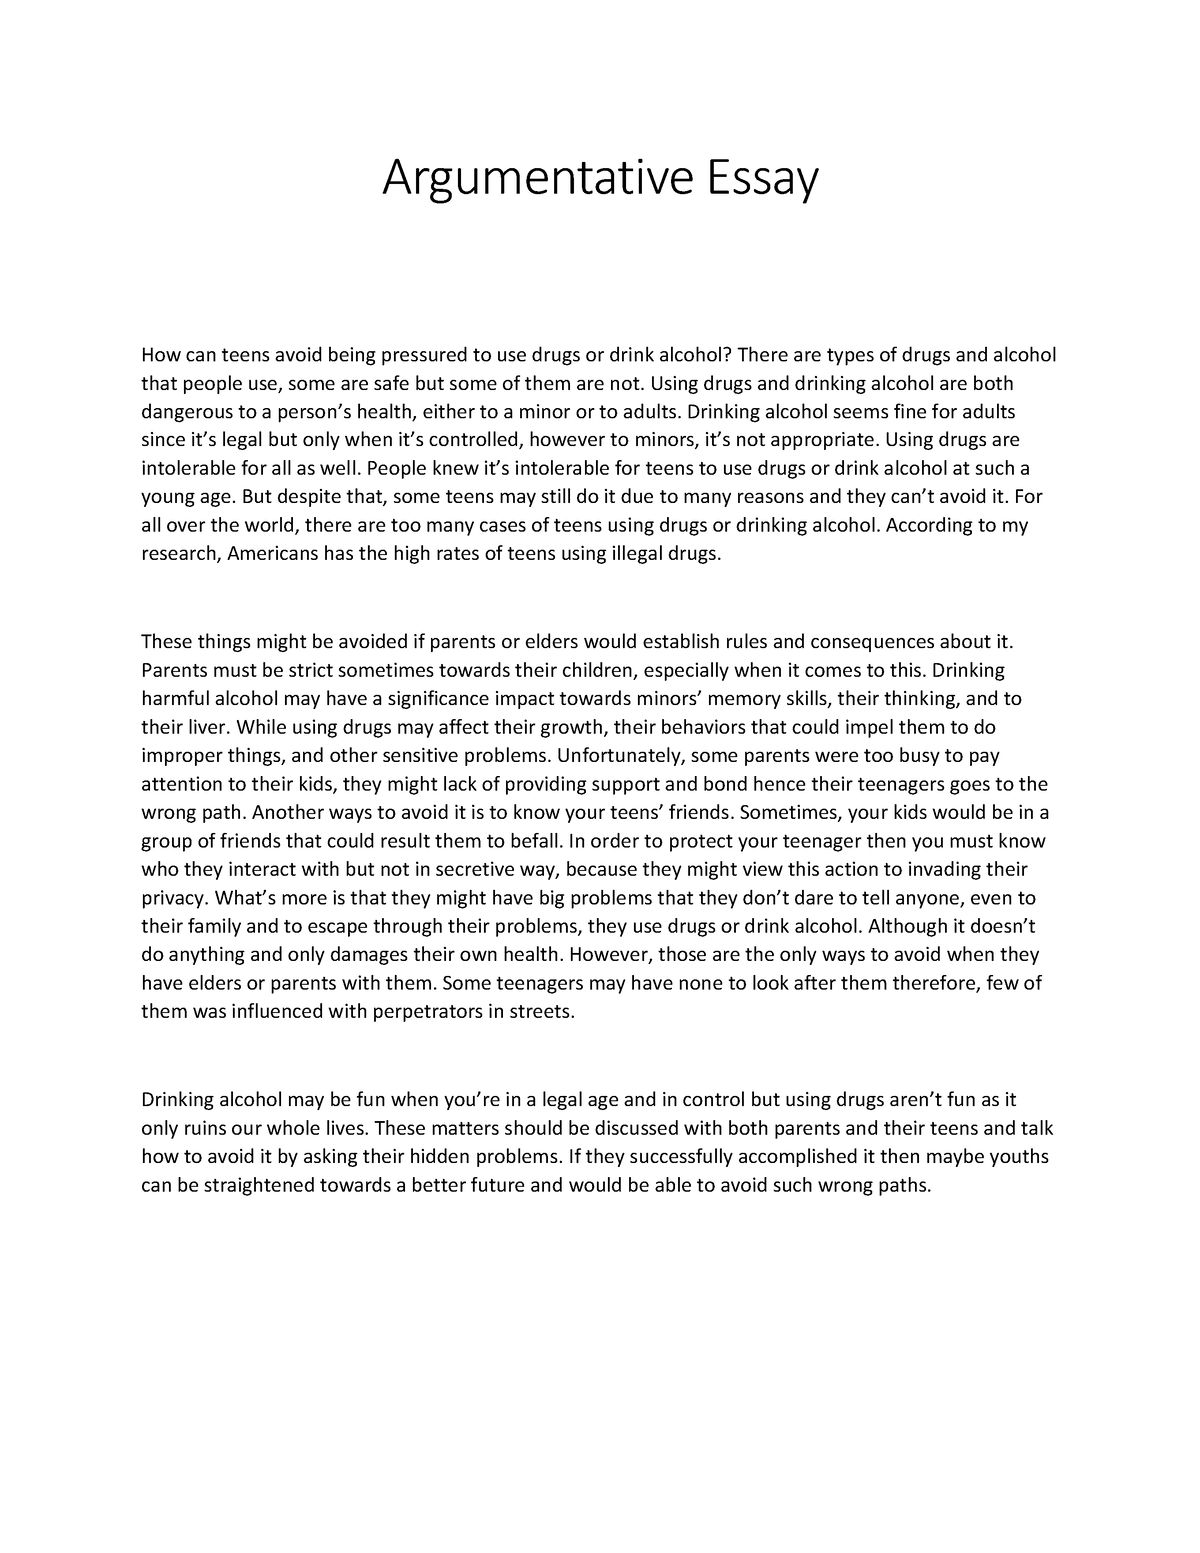 Essay - Argumentative Essay How can teens avoid being pressured to use ...